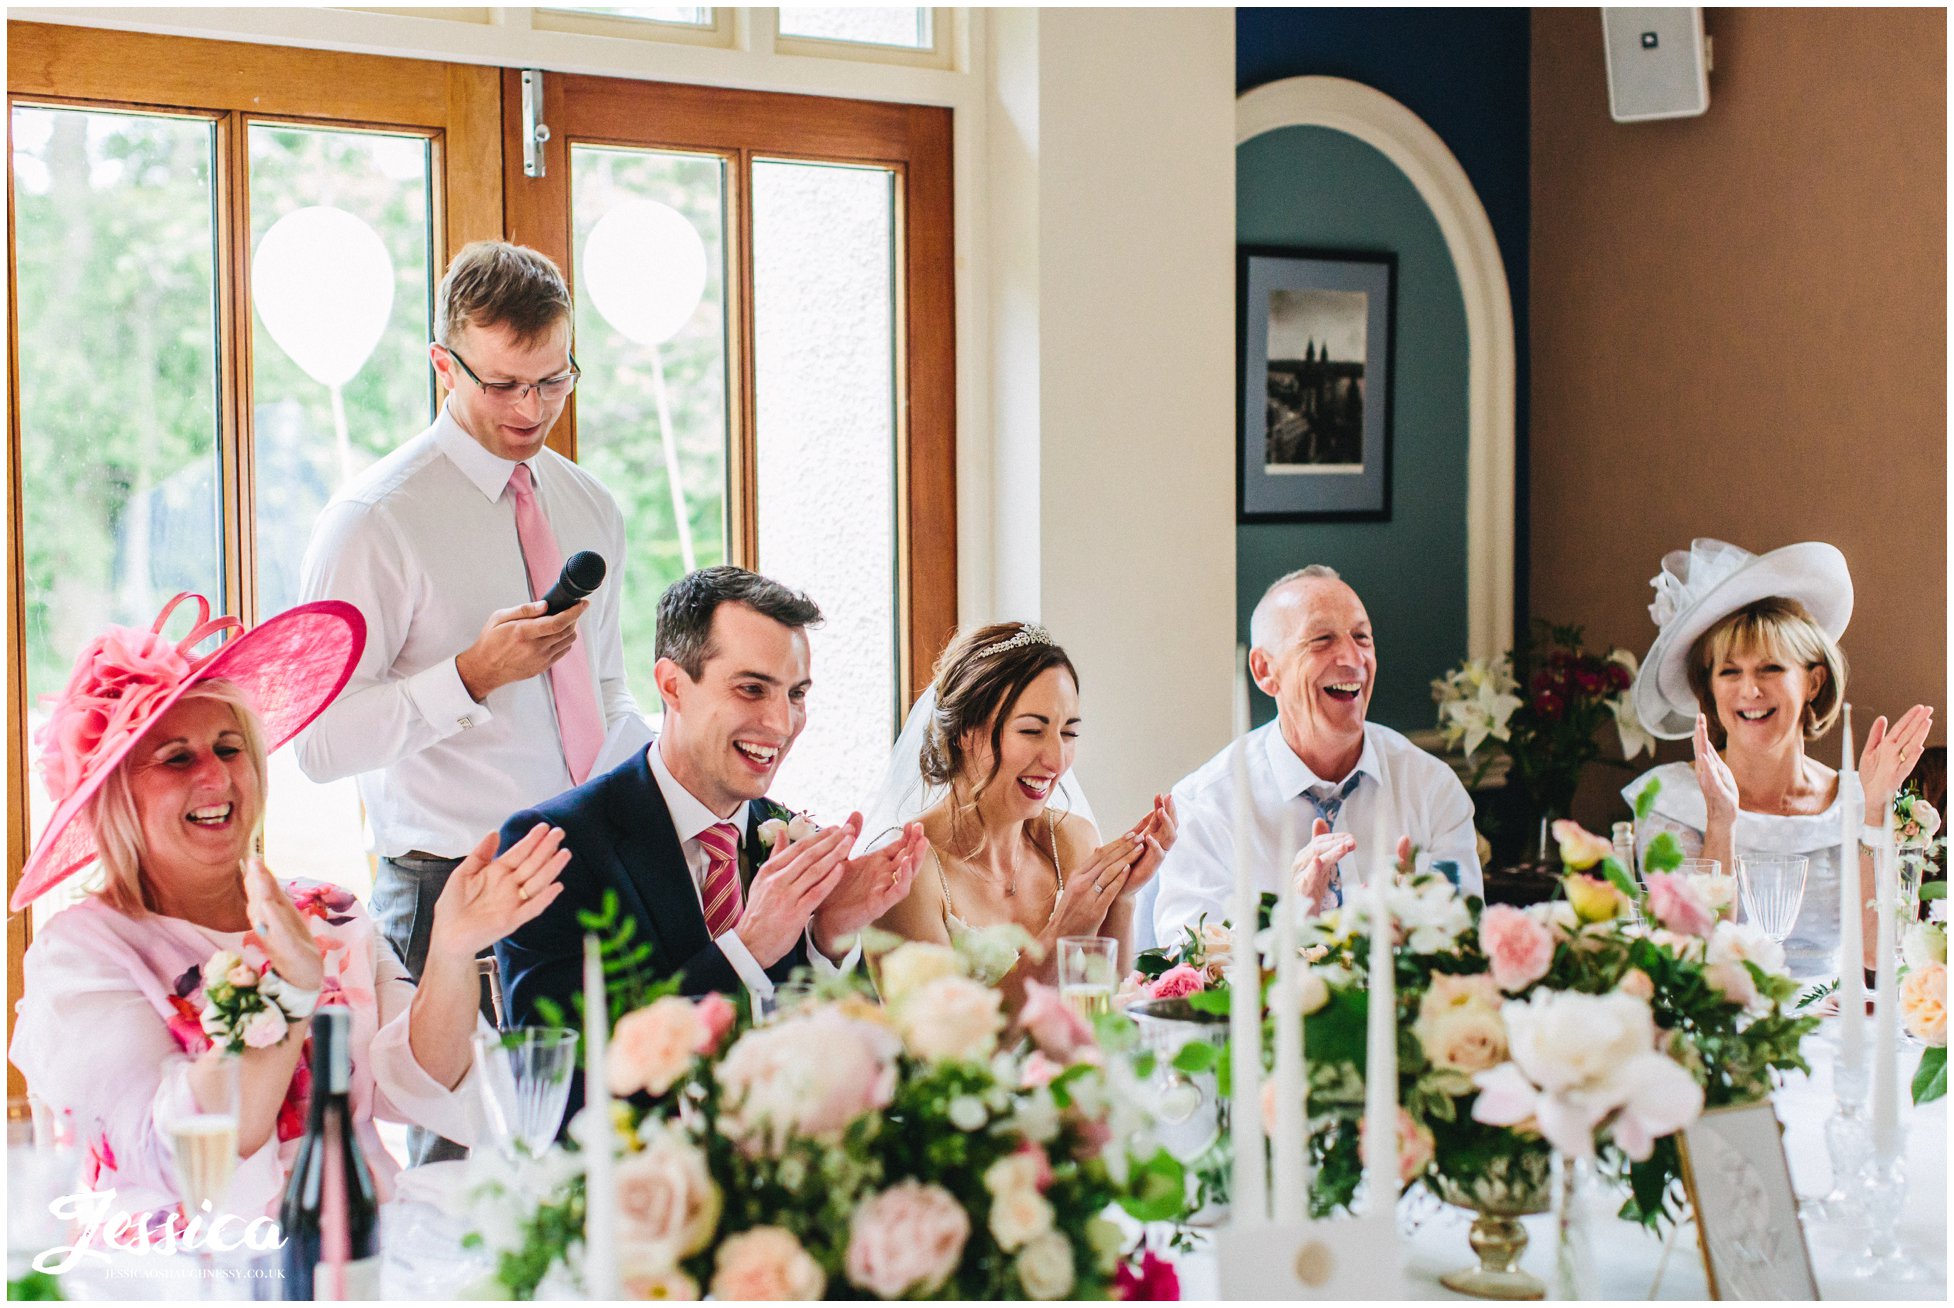 the top table applaud the best man after his gives his speech